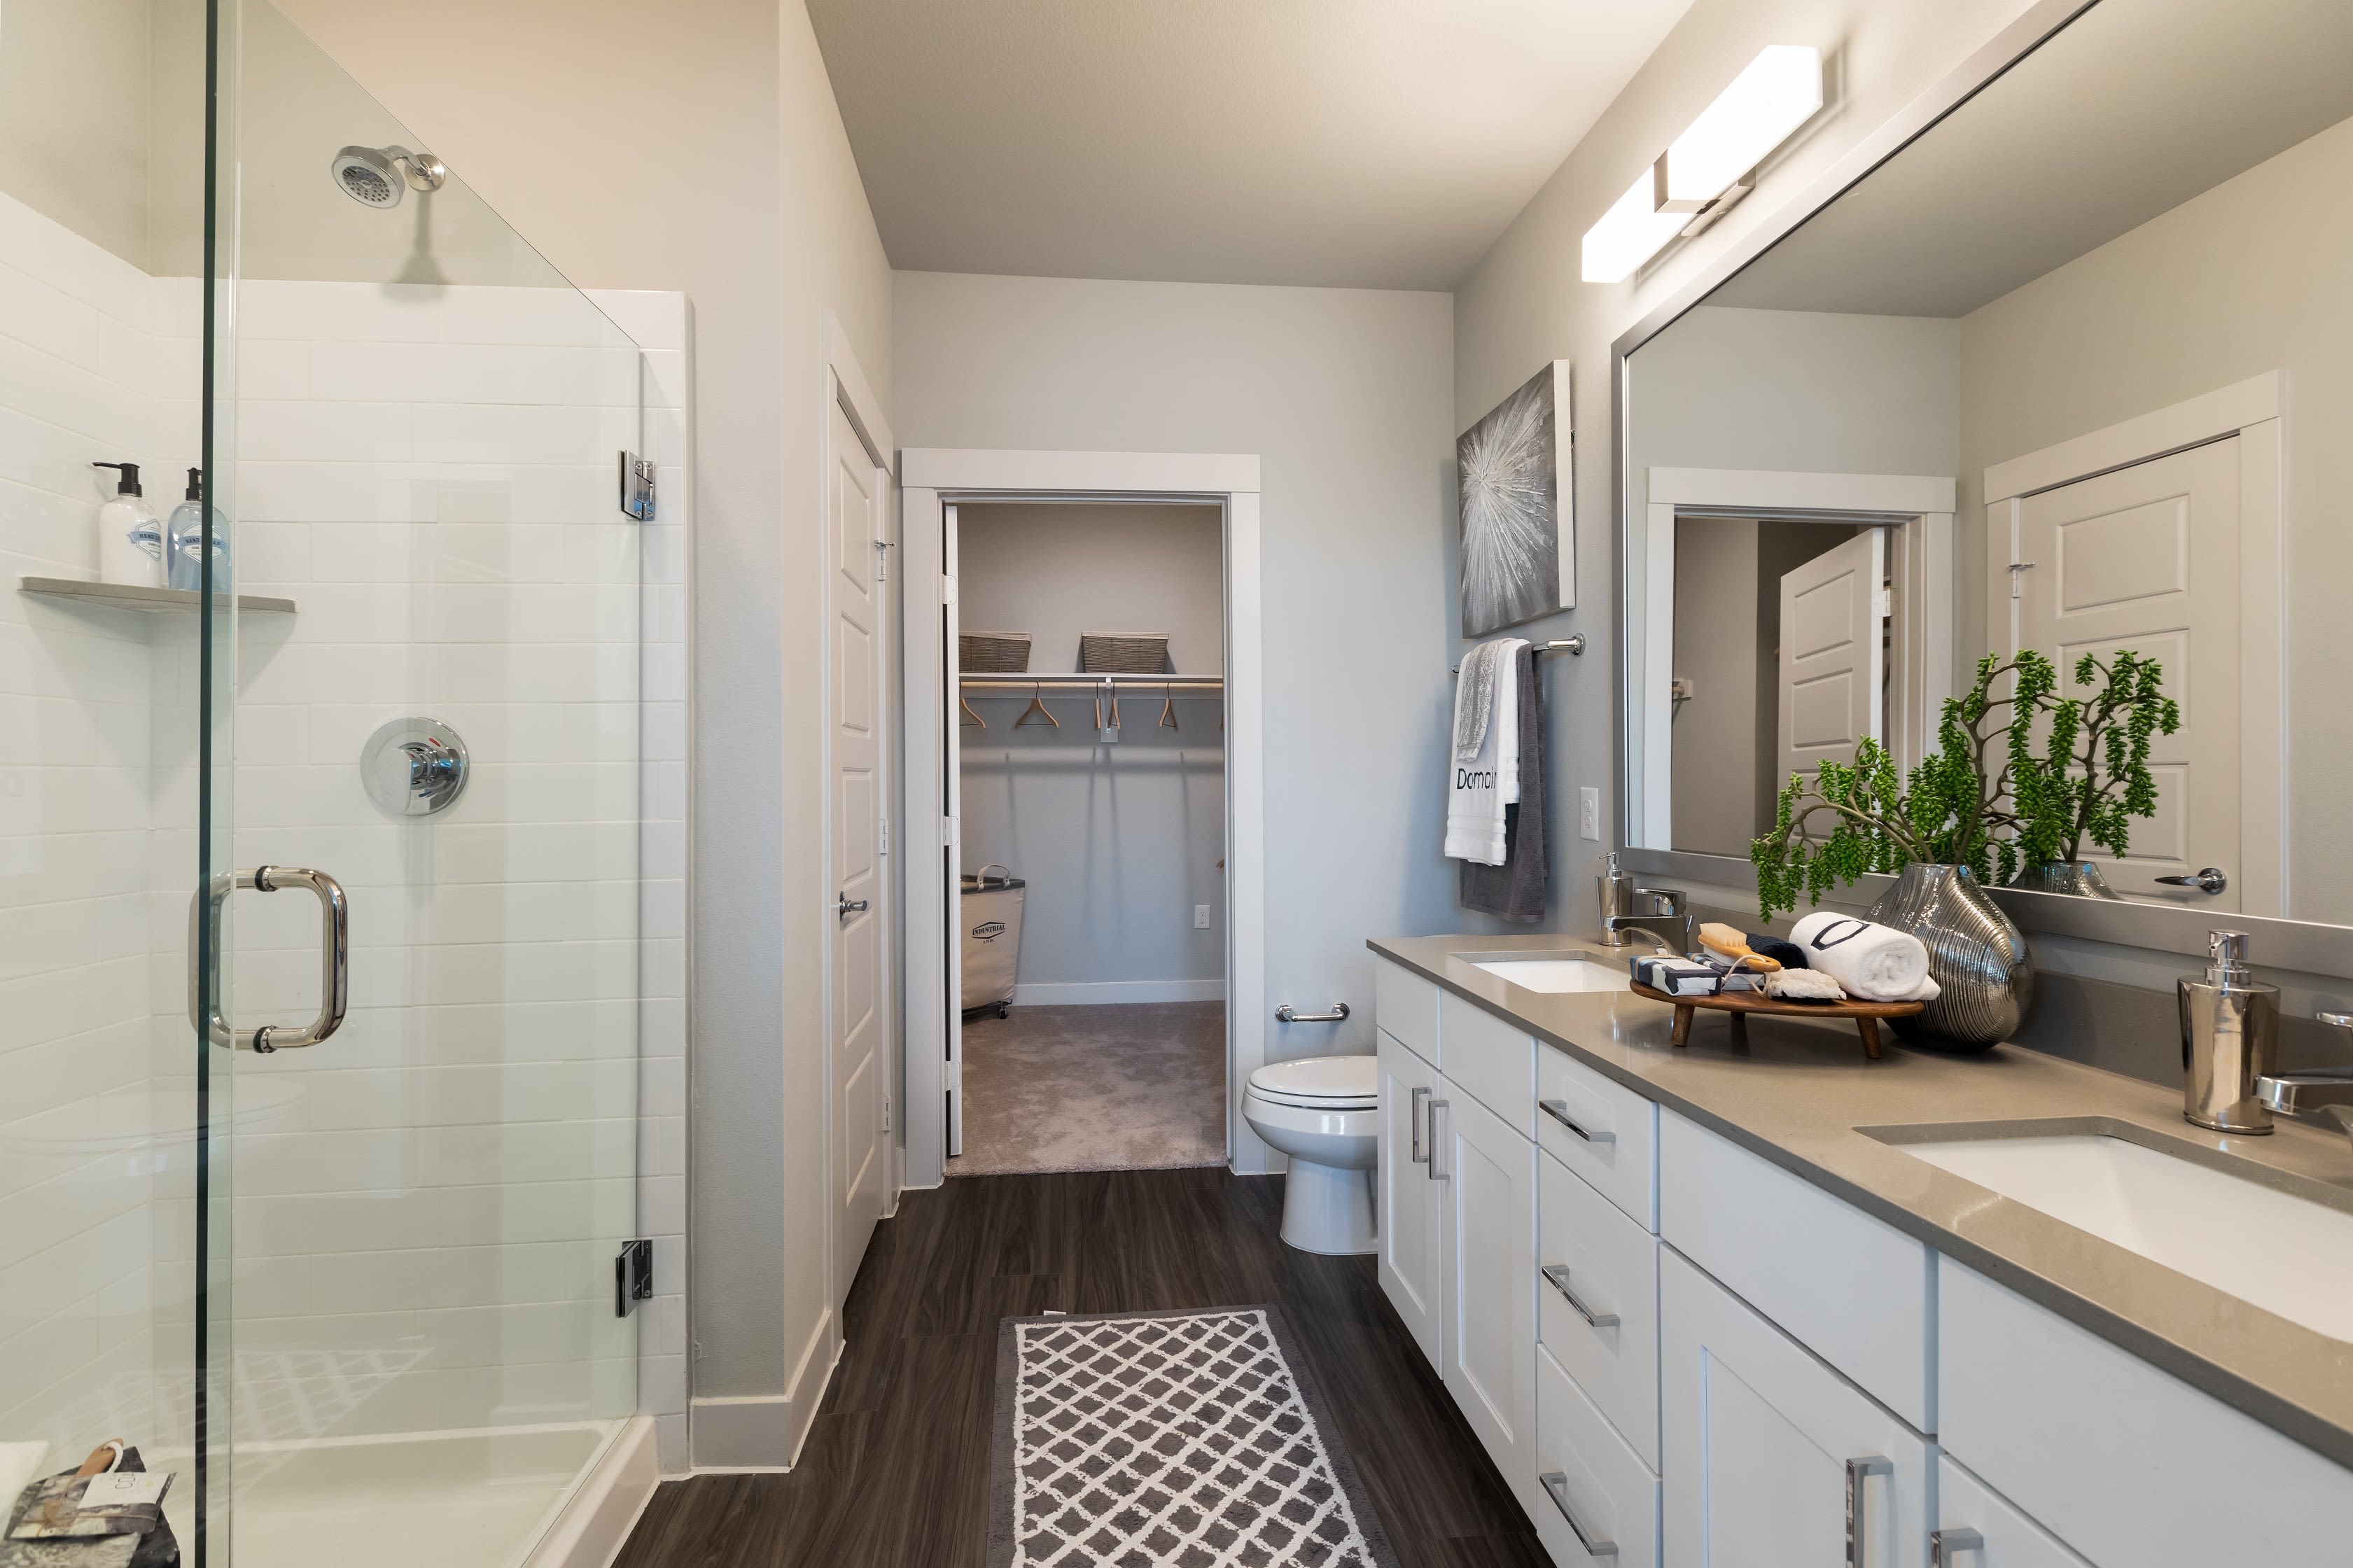 Roomy bathroom with lots of storage space under the large vanity at Domain at Founders Parc in Euless, Texas